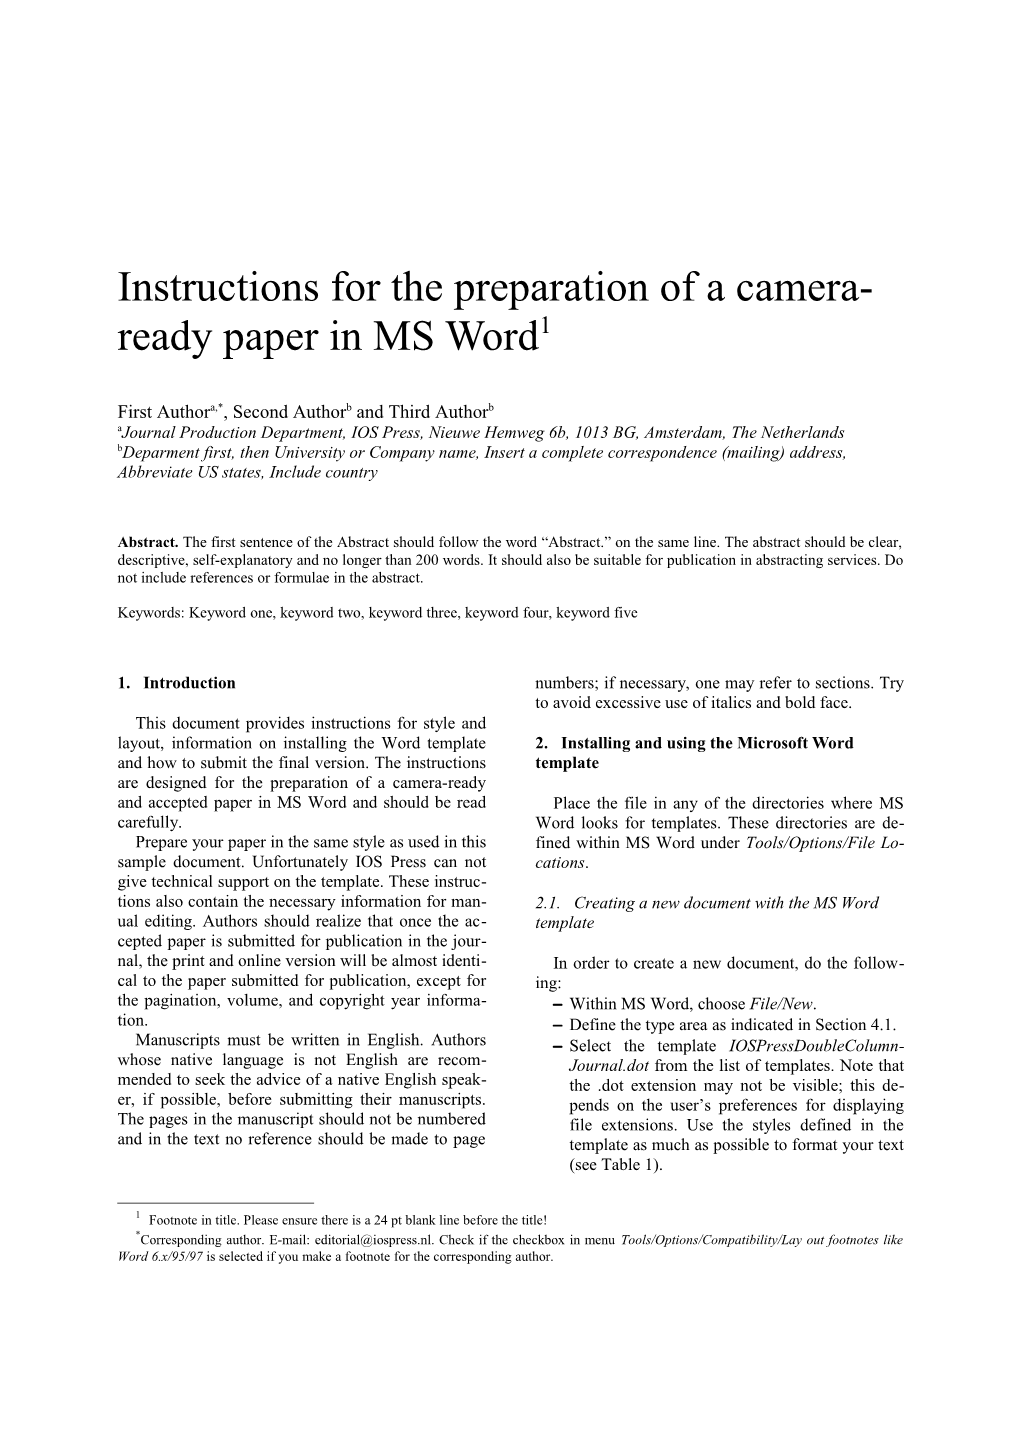 Instructions for the Preparation of a Camera-Ready Paper in MS Word